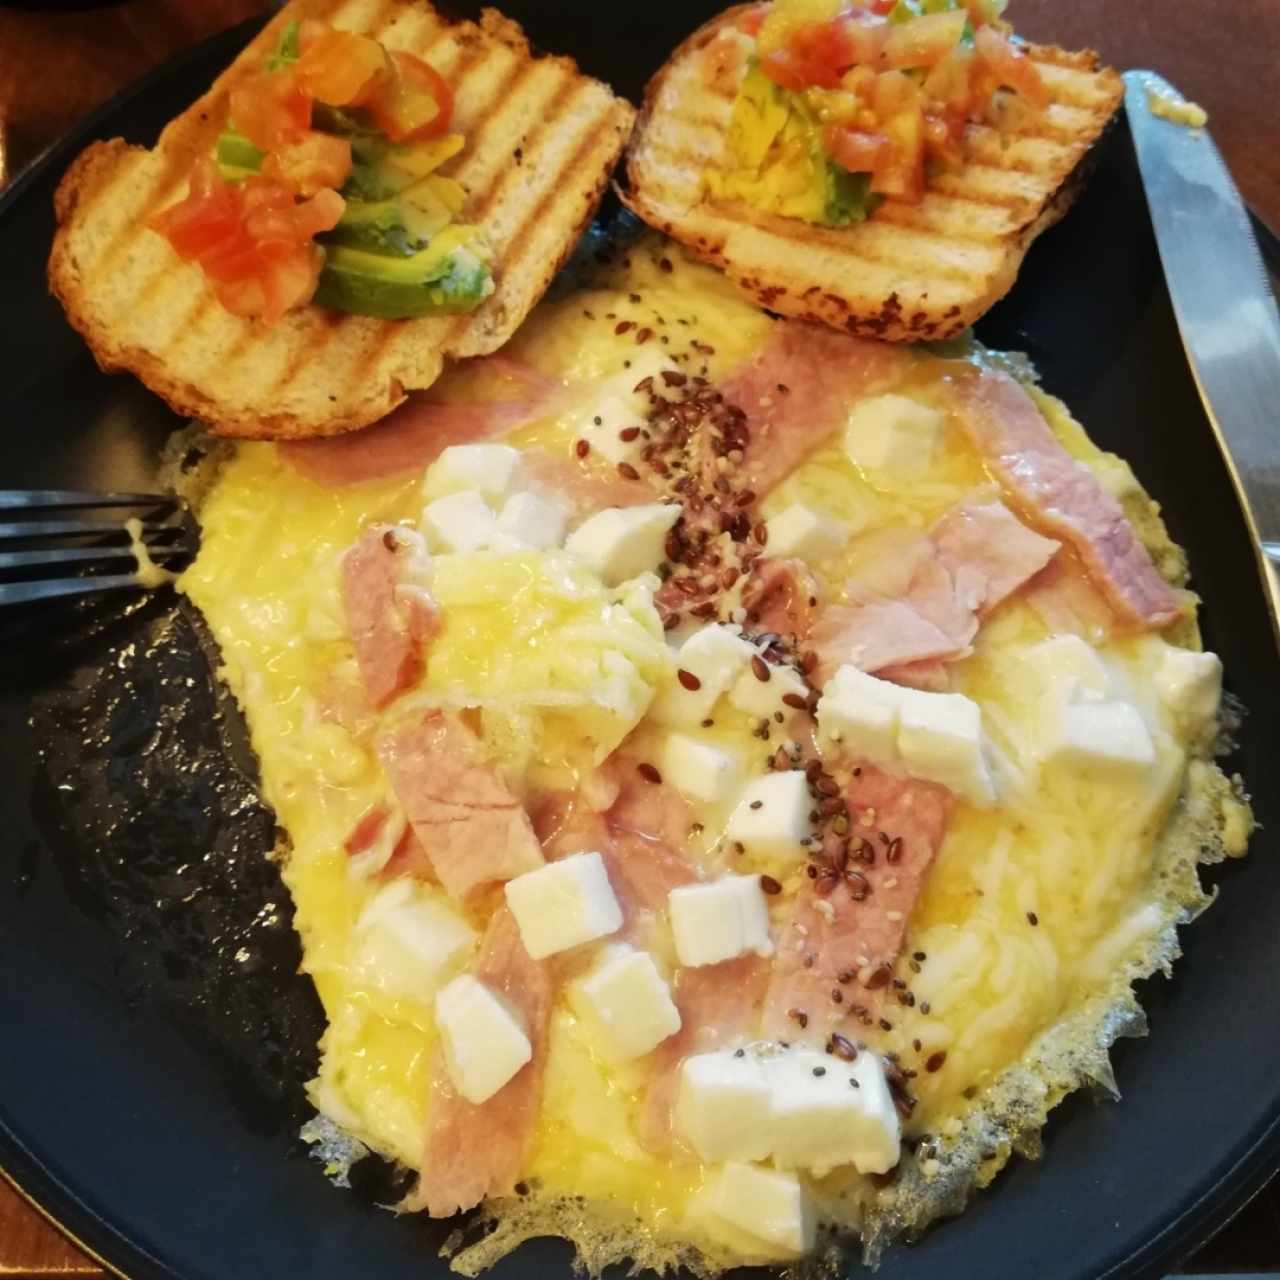 omelet con jamón y queso